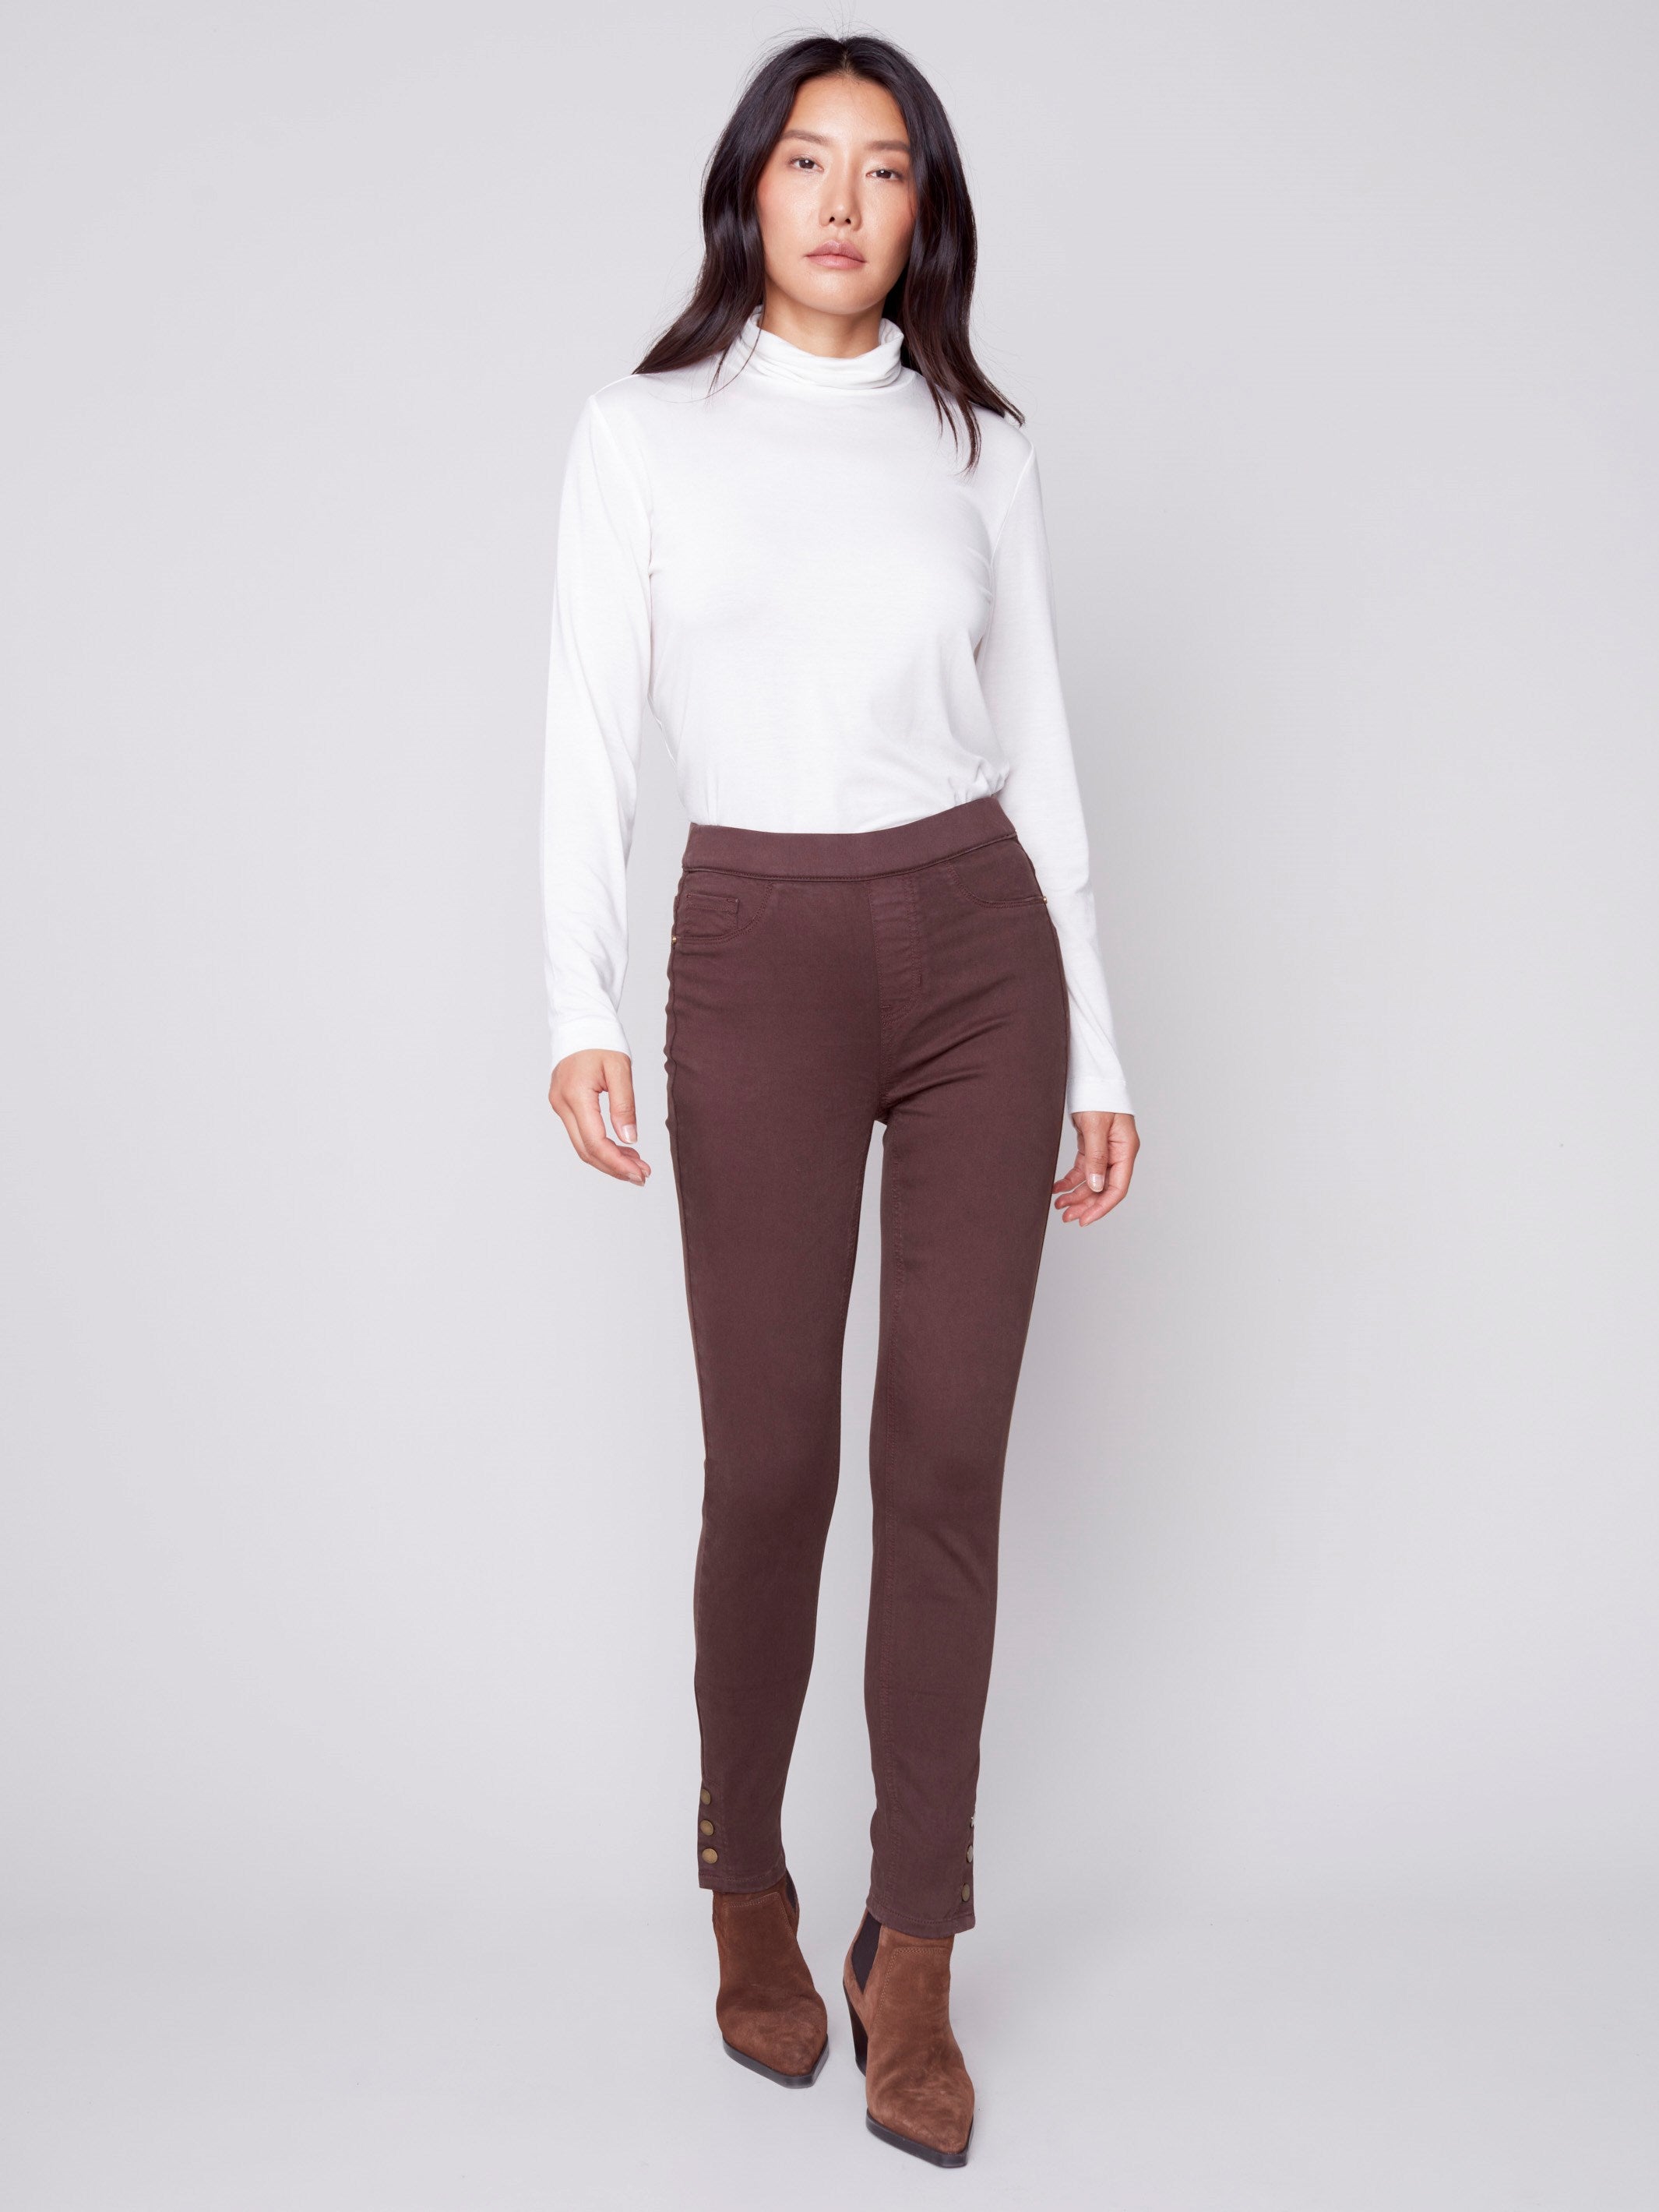 Pull-On Twill Pants with Snap Button Hem - Chocolate